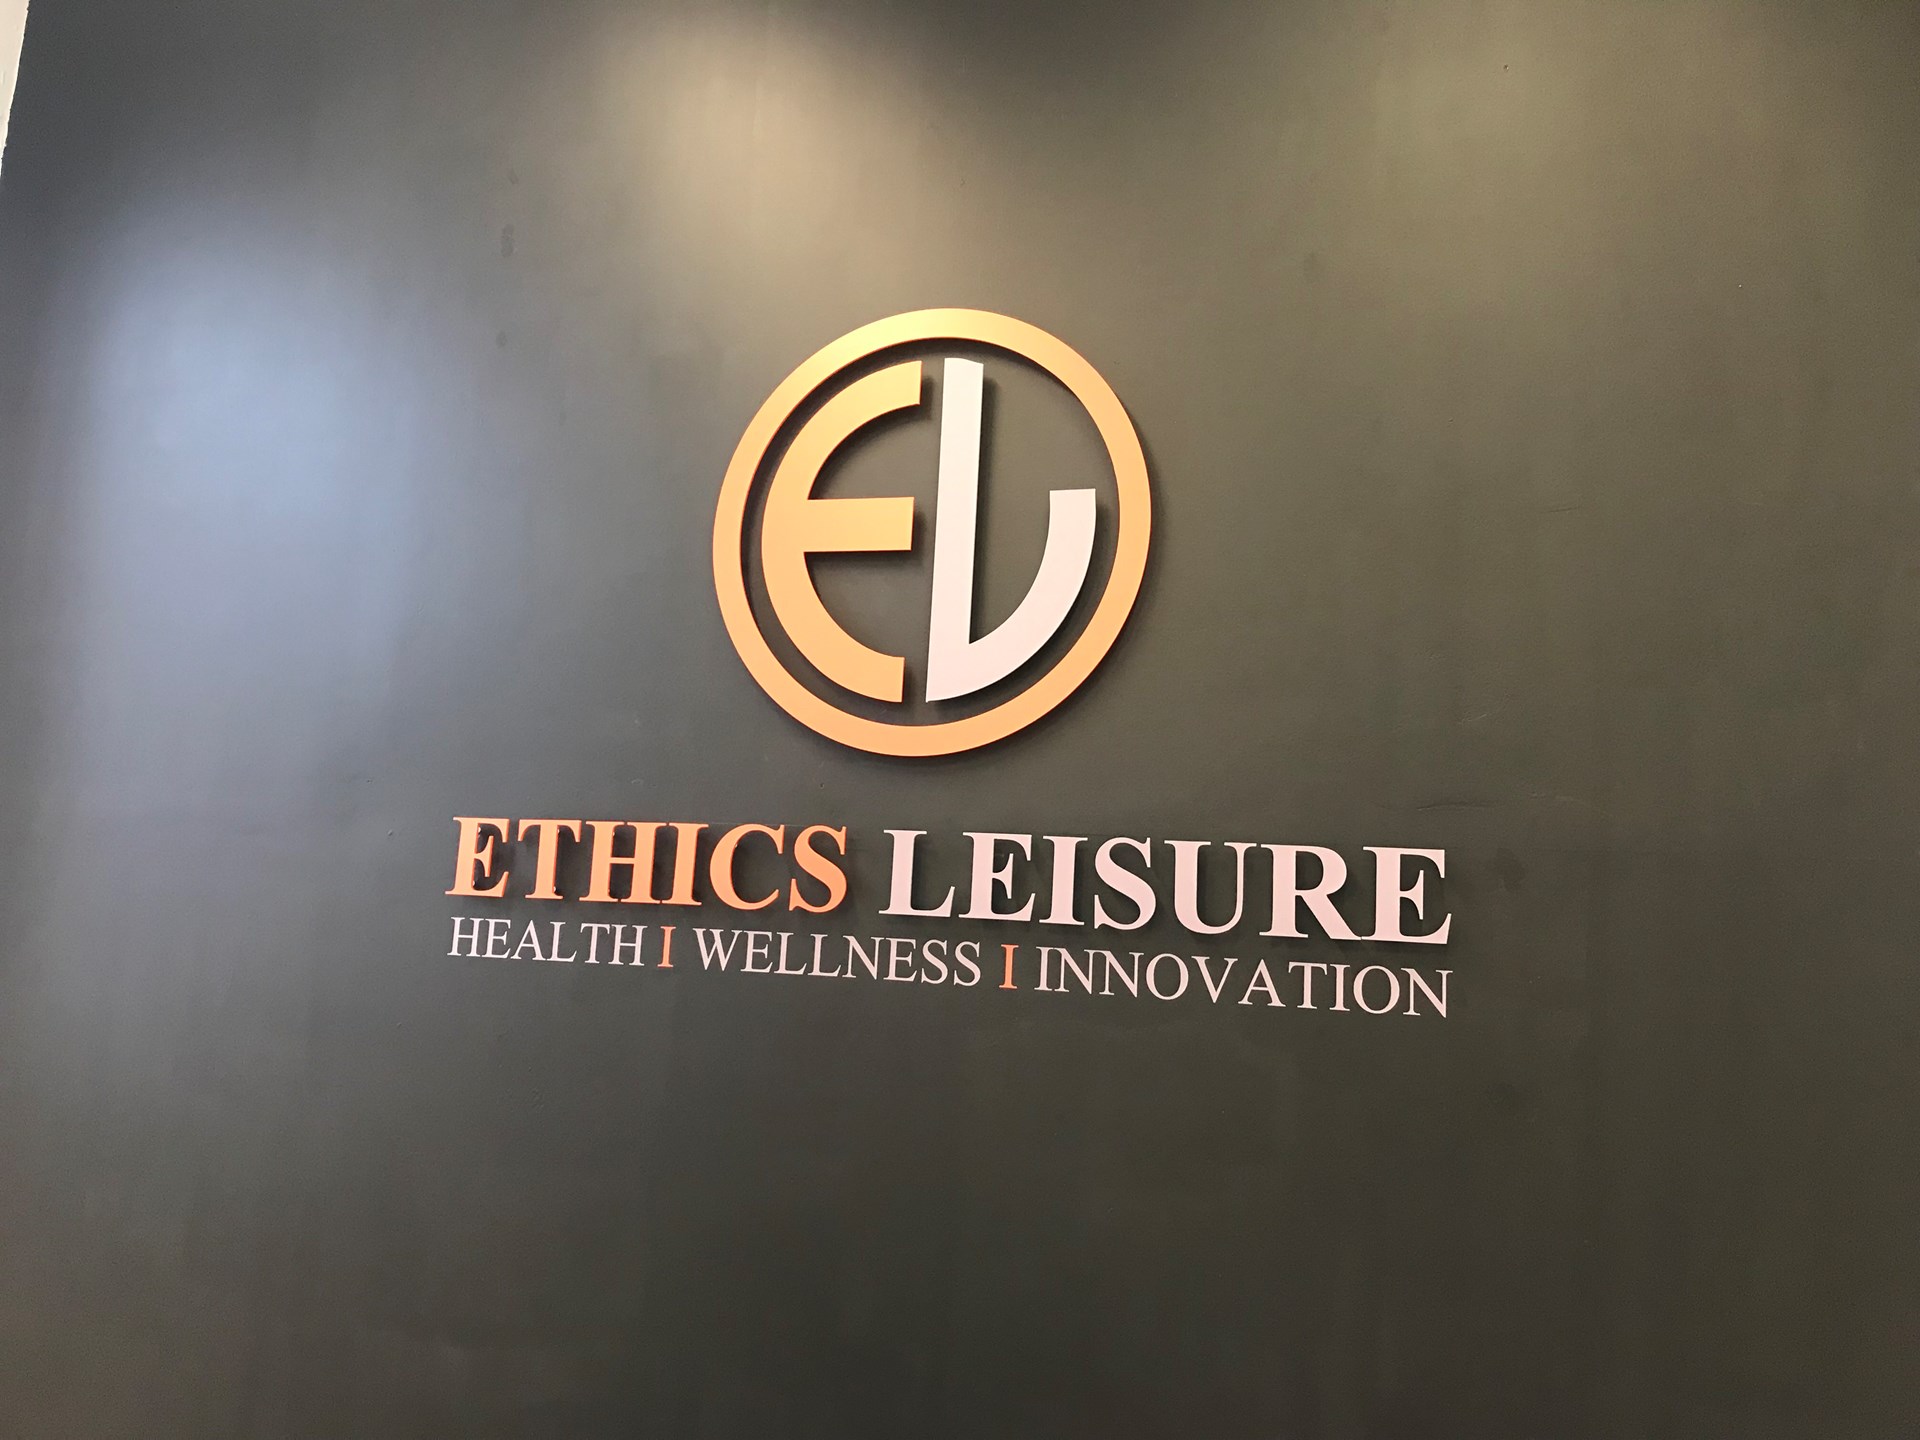 Acrylic Letters And Vinyl Text Ethics Leisure Macclesfield